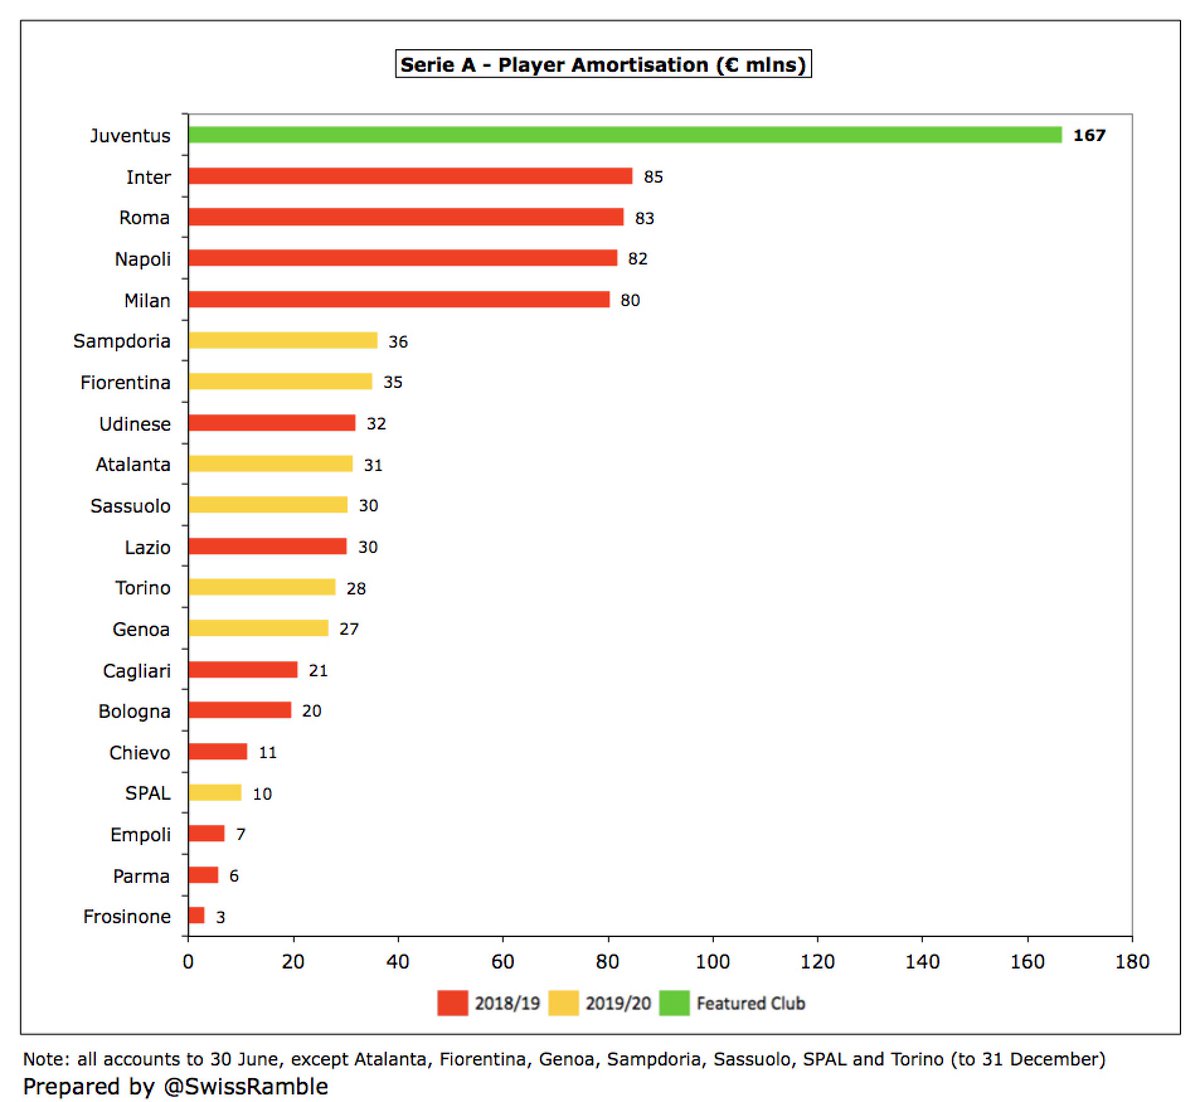 As a result,  #Juventus player amortisation of €167m is by far the highest in Italy, more than twice as much as Inter €85m, Roma €83m, Napoli €82m and Milan €80m. To place this into context, their €149m in 2018/19 was more than all other European clubs except  #CFC.